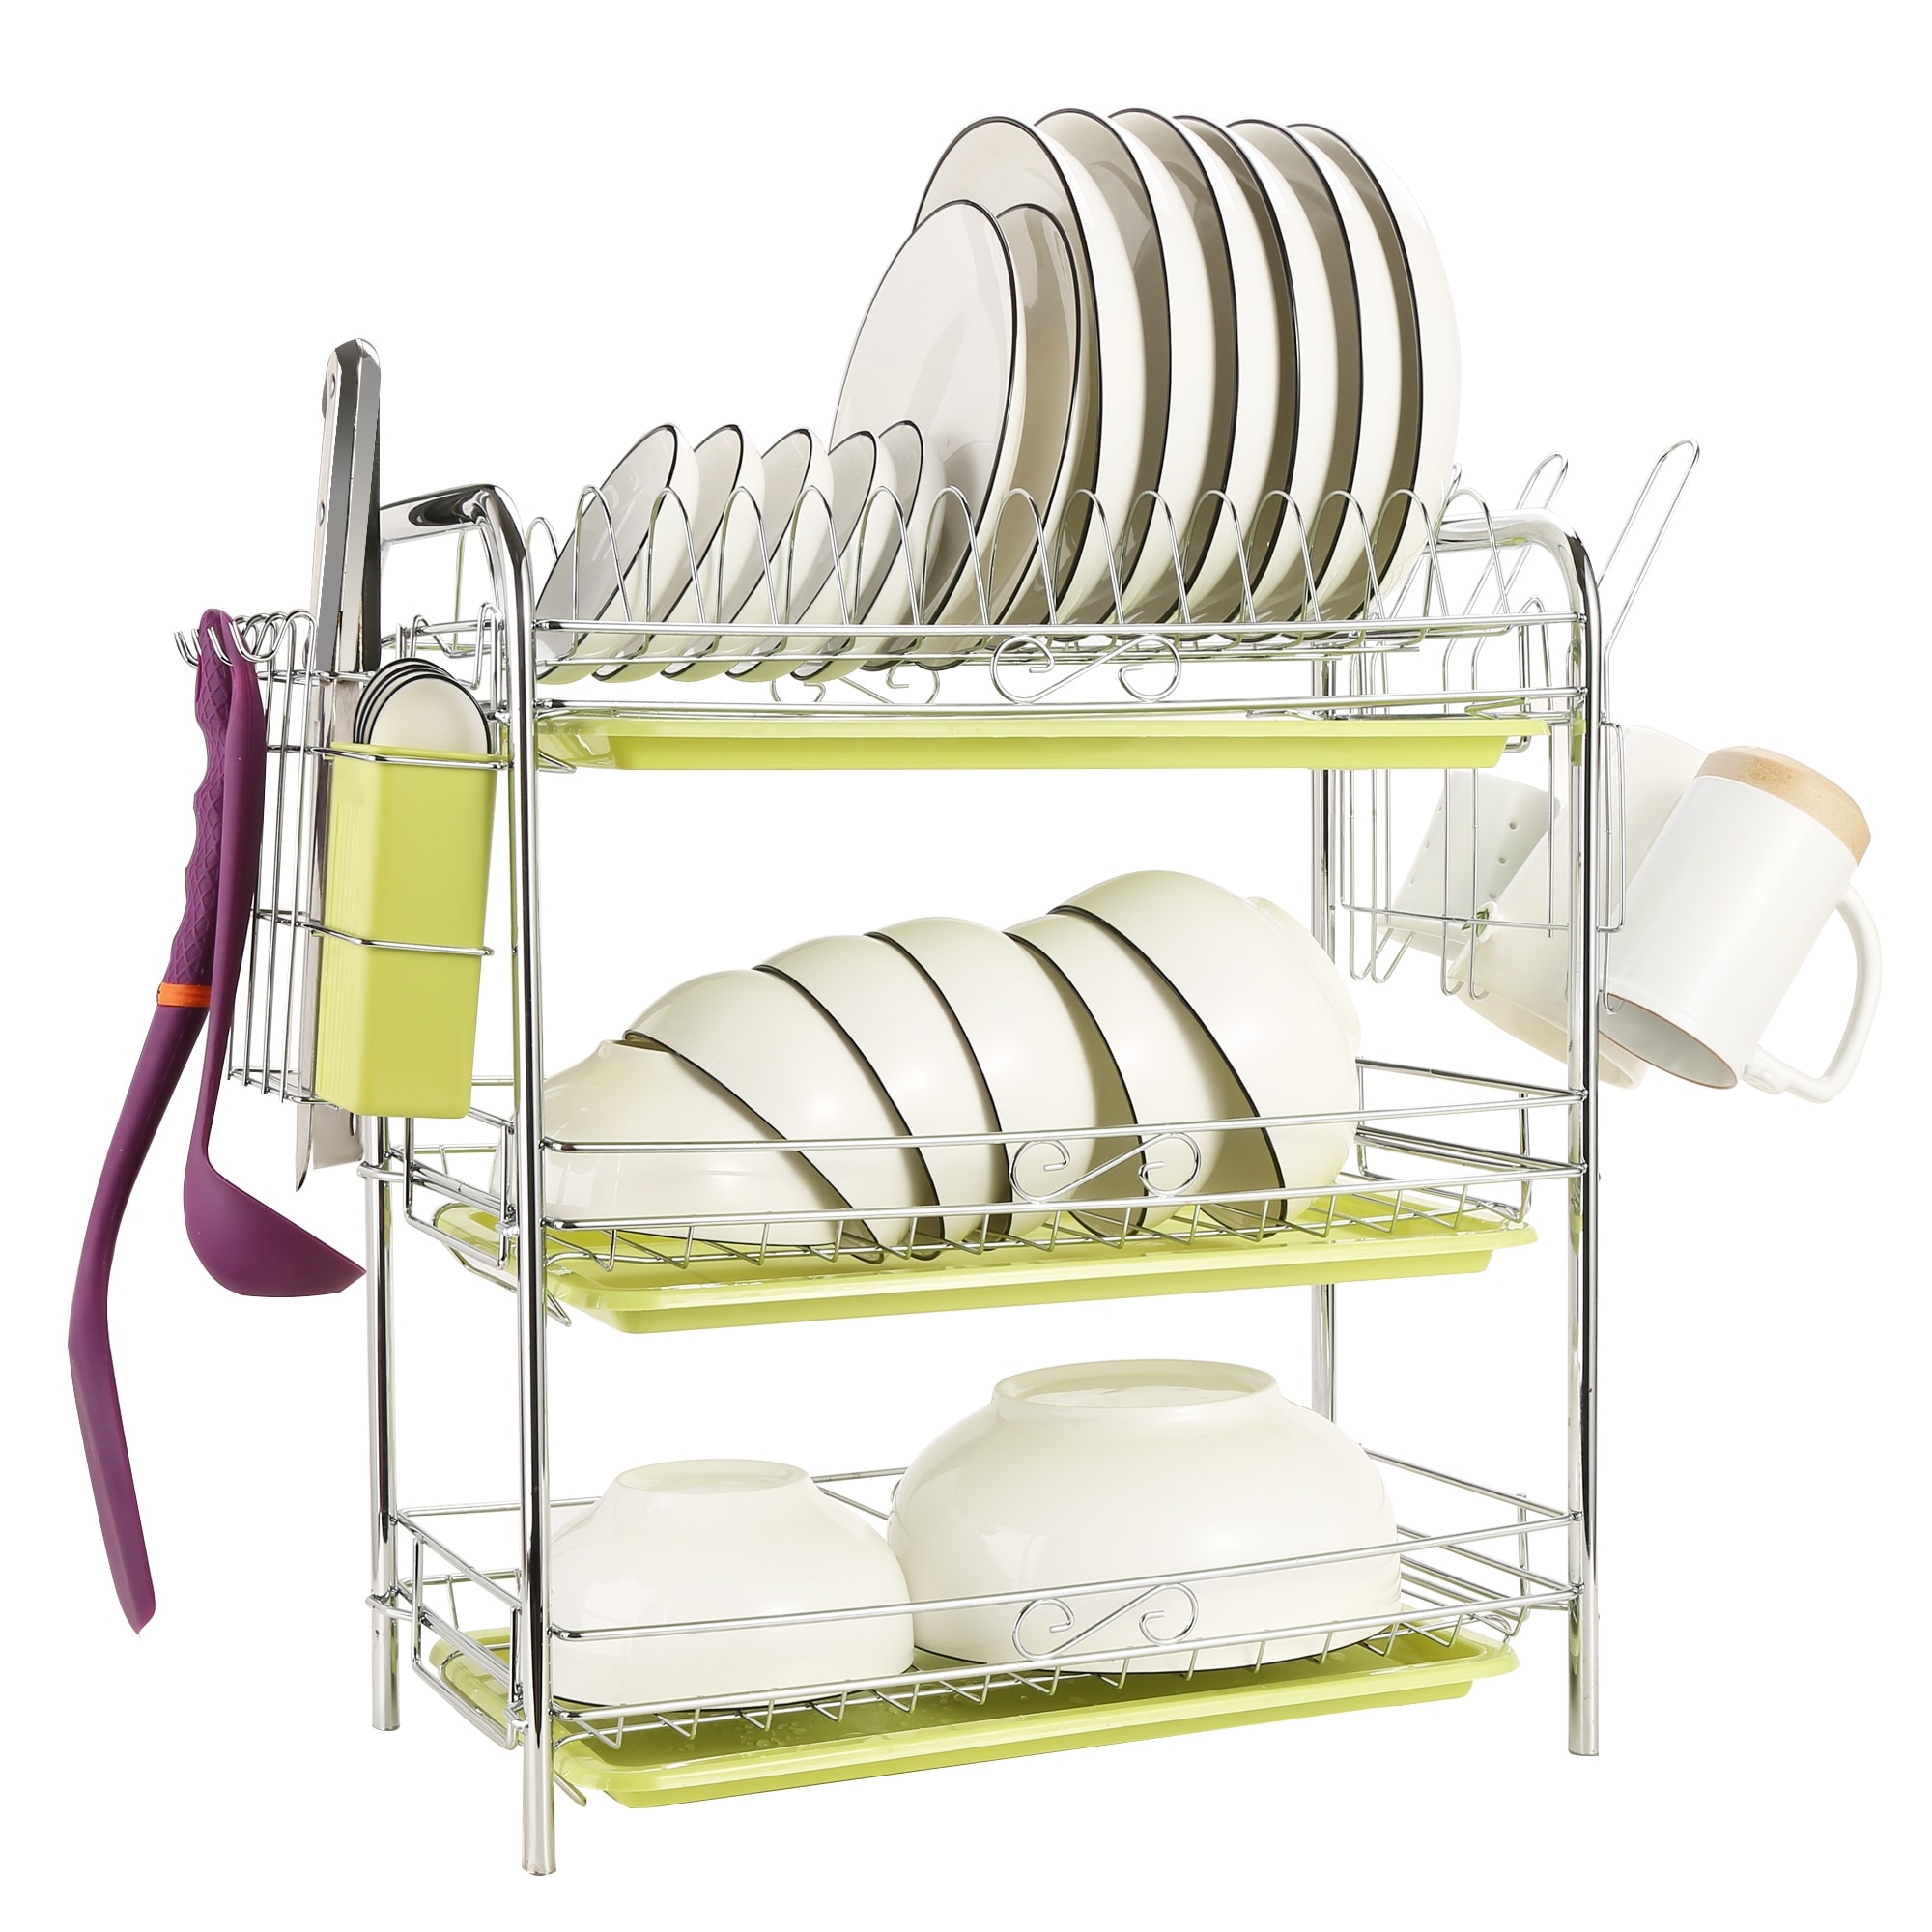 https://ak1.ostkcdn.com/images/products/is/images/direct/9879c046313786fc6e7c9f6403f09d233740b23d/ODOLAND-3-Tiers-Dish-Drying-Rack-3-Tier-Chrome-Dish-Drainer-Rack-Kitchen-Storage-with-draining-board-and-Cutlery-Cup-22..jpg